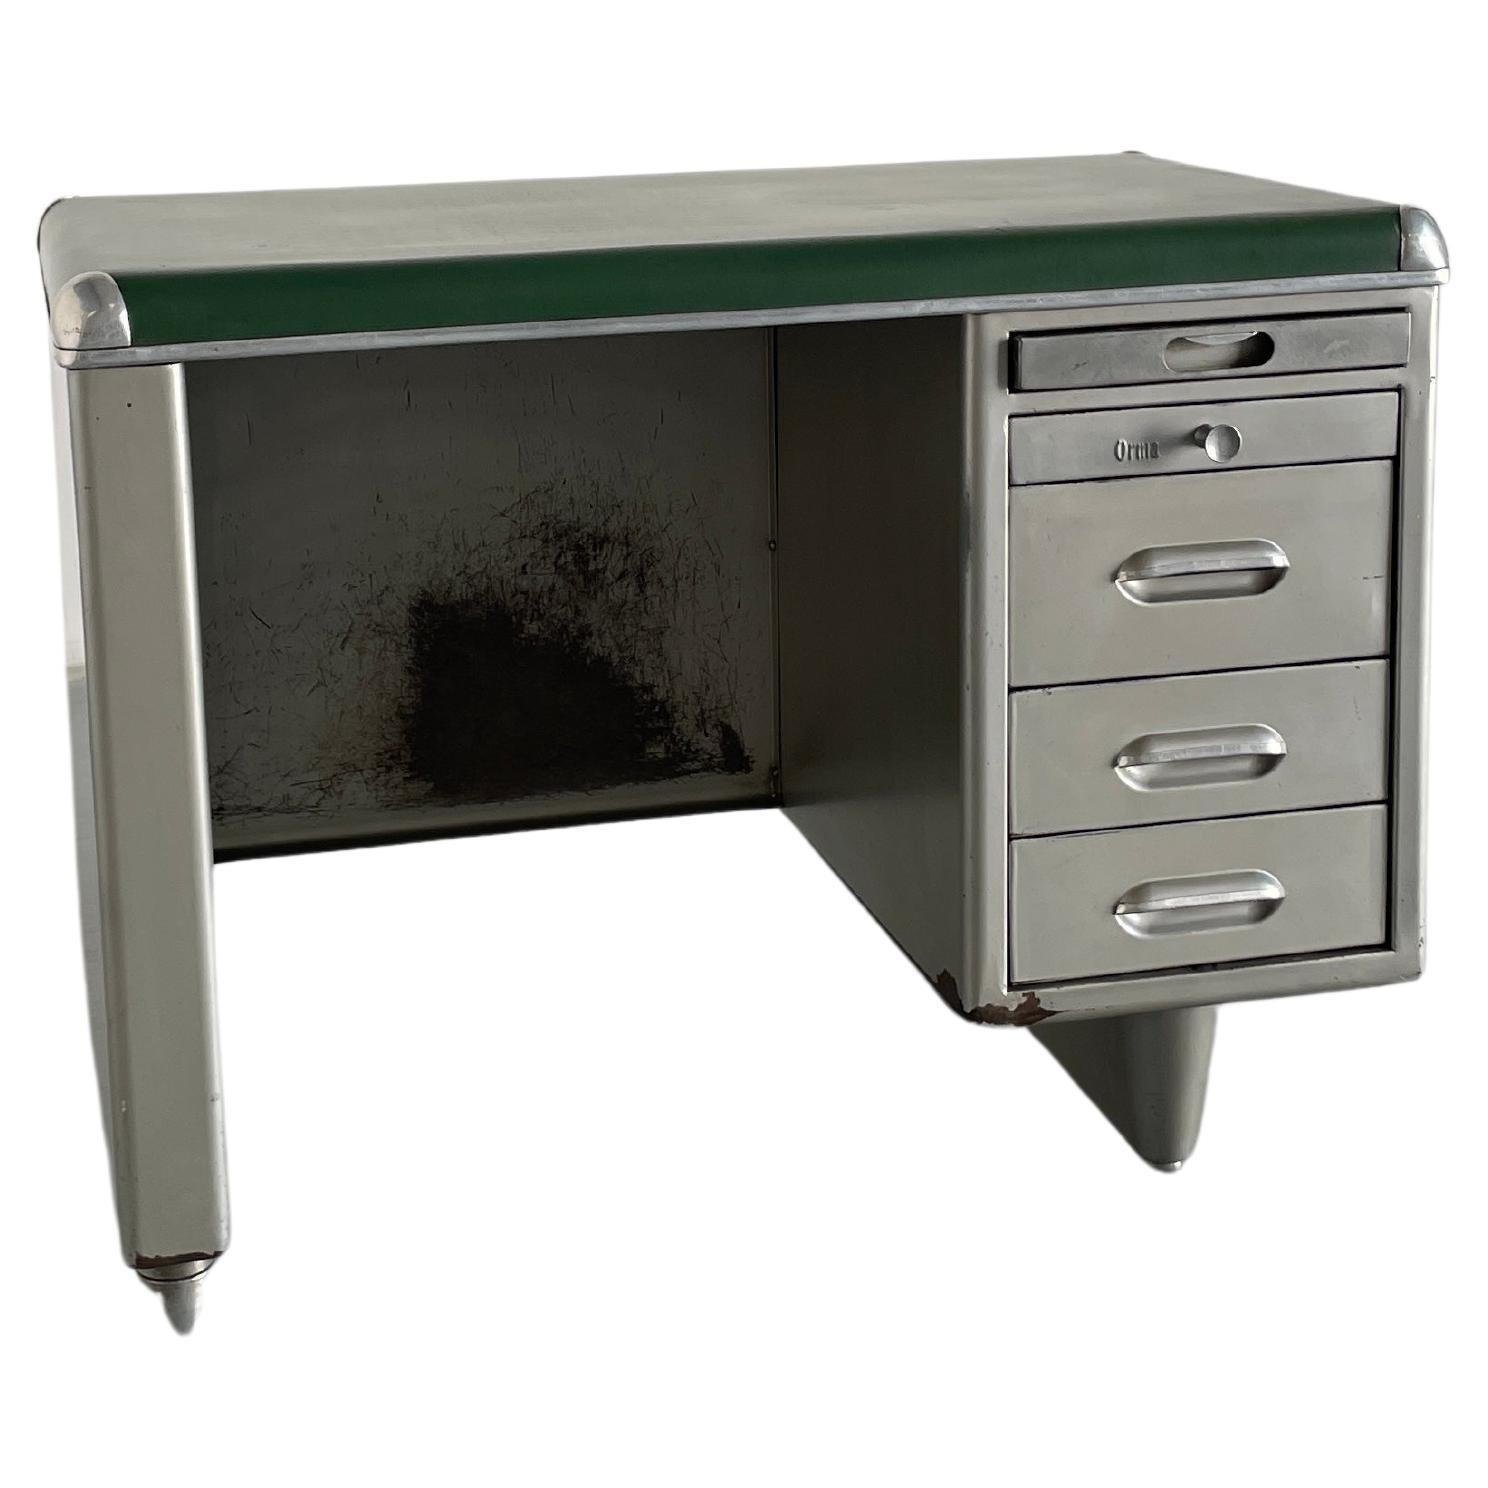 1950s Industrial Single Bank Steel Tanker Desk by Orma Milano, Italy For Sale